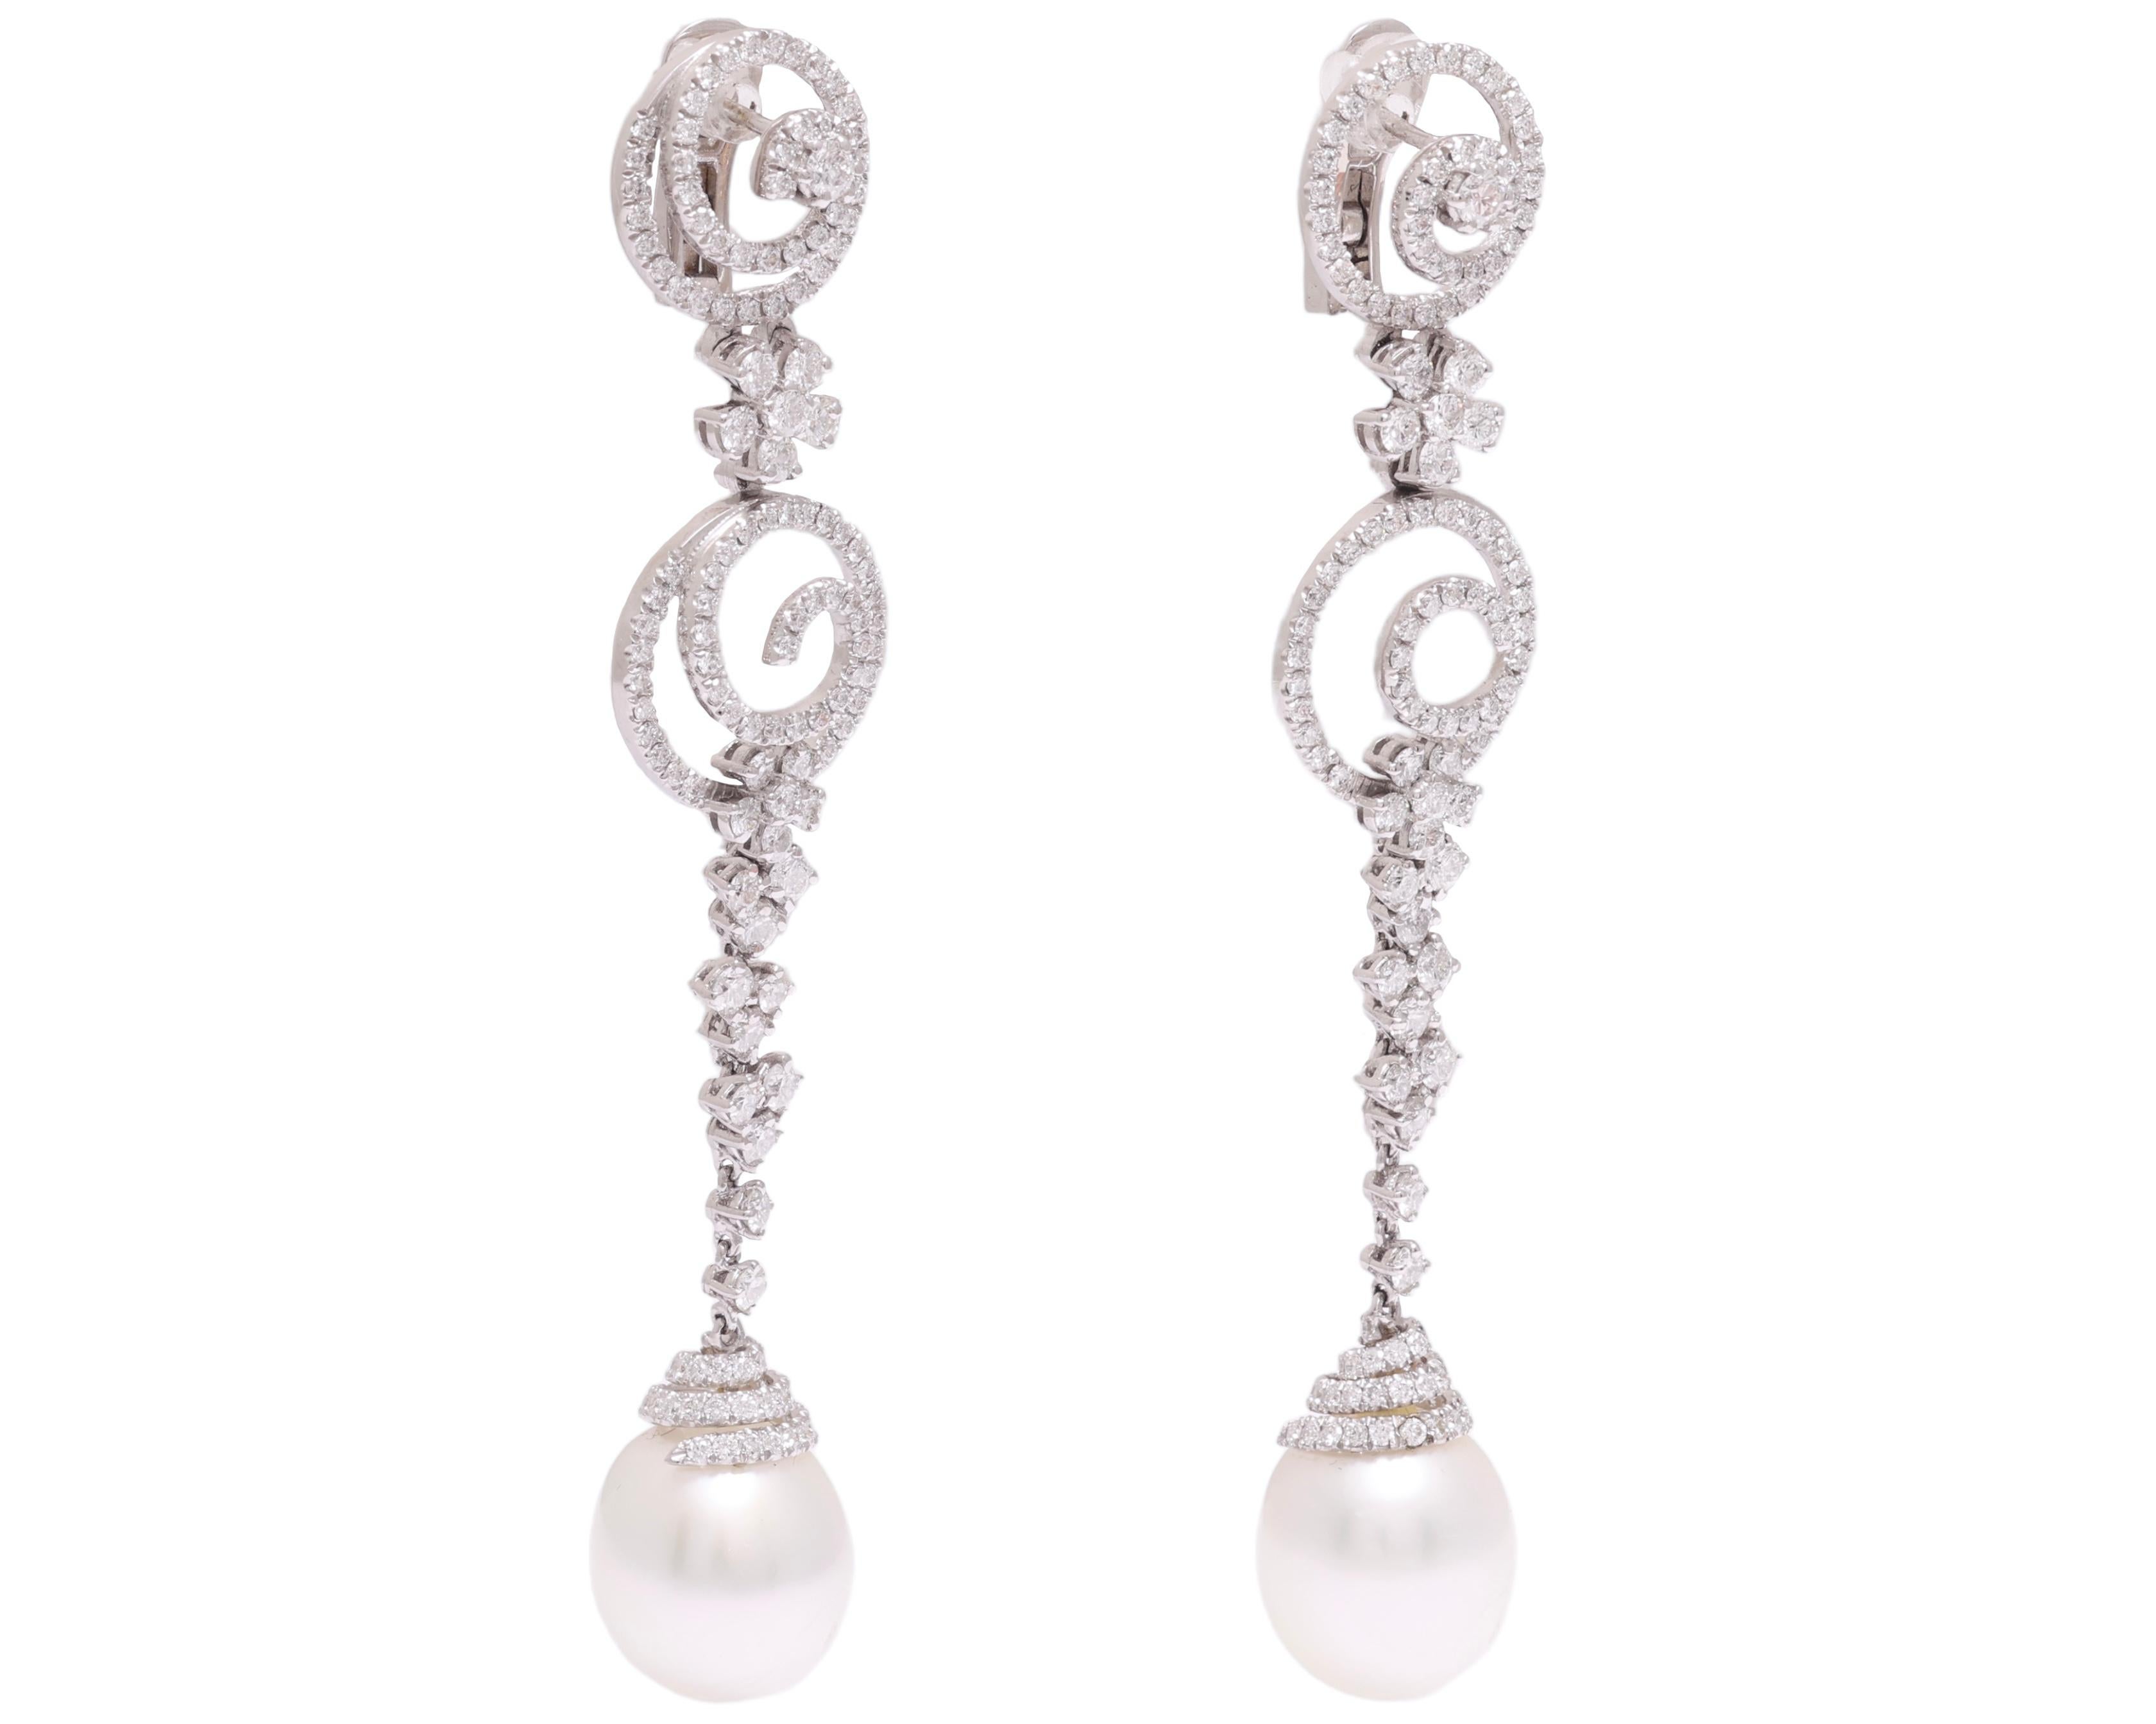 Magnificent Dangling 18kt White Gold Earrings Set With 5.10ct Diamonds And South Sea Pearls

Matching earrings Item Reference LU1752212774082

Diamonds: Brilliant cut diamonds, together ca. 5.10ct

Pearl: South Sea 14 mm

Measurements: 17 mm x 88